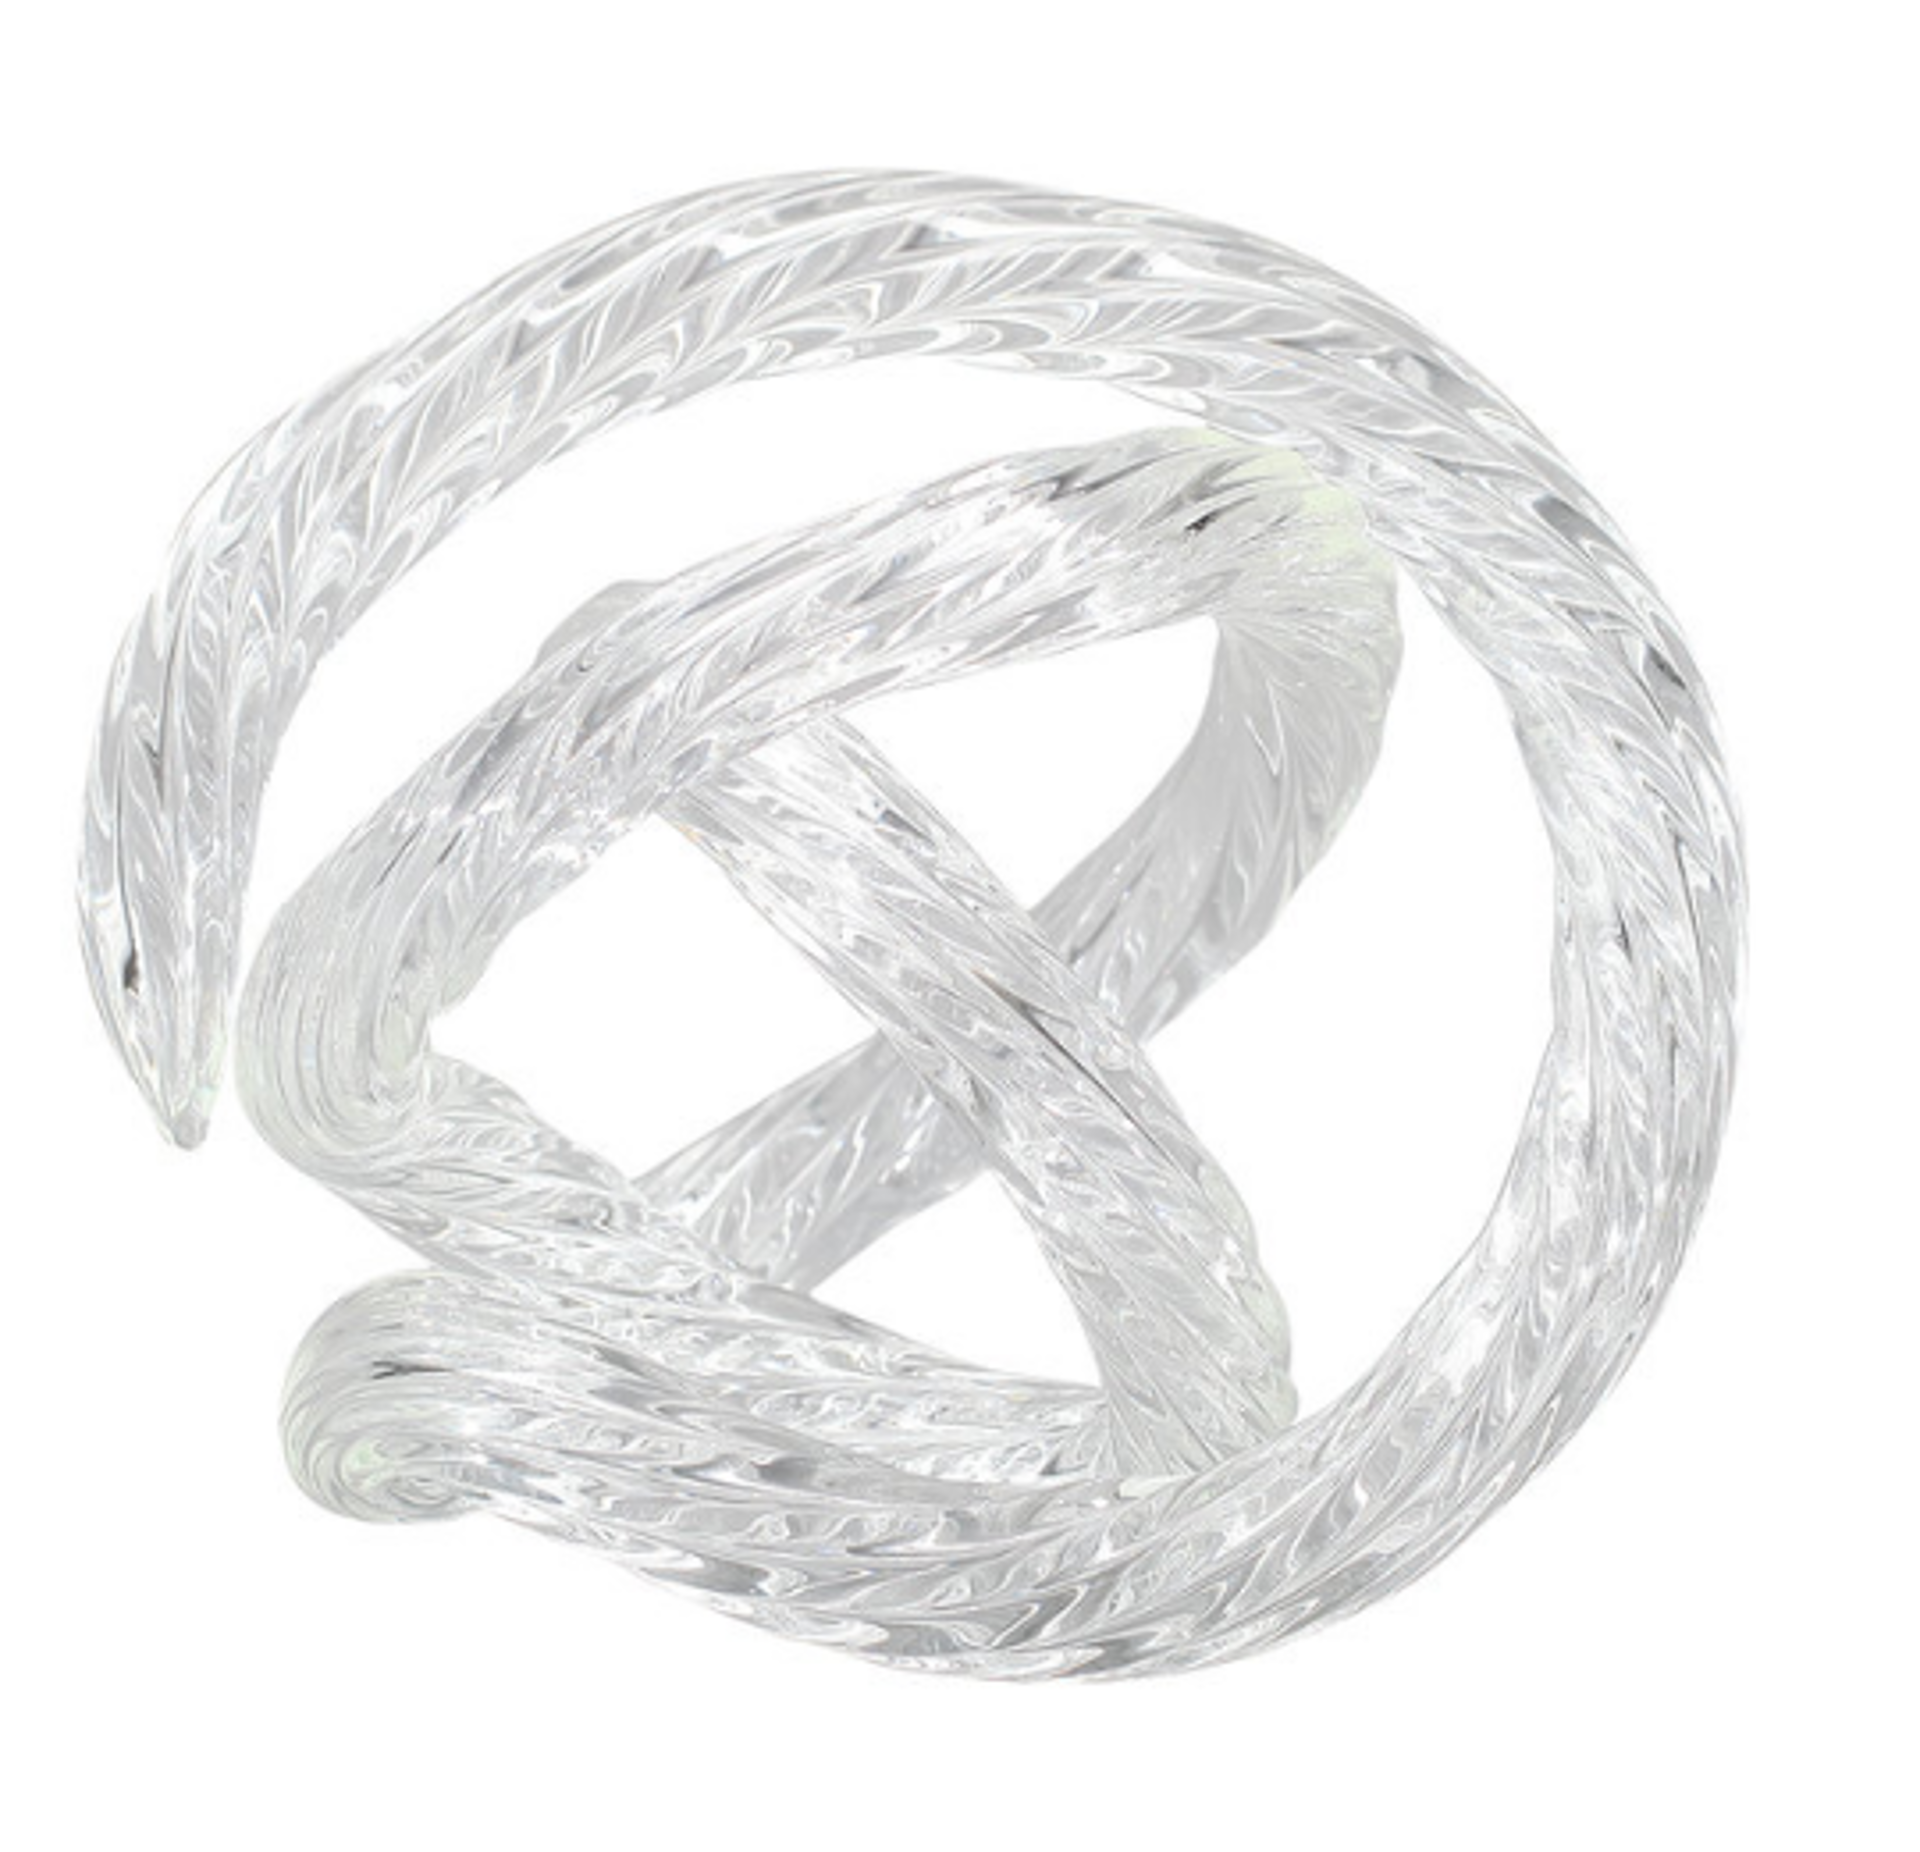 Clear Glass Love Knot - CH-C by V Handblown Glass